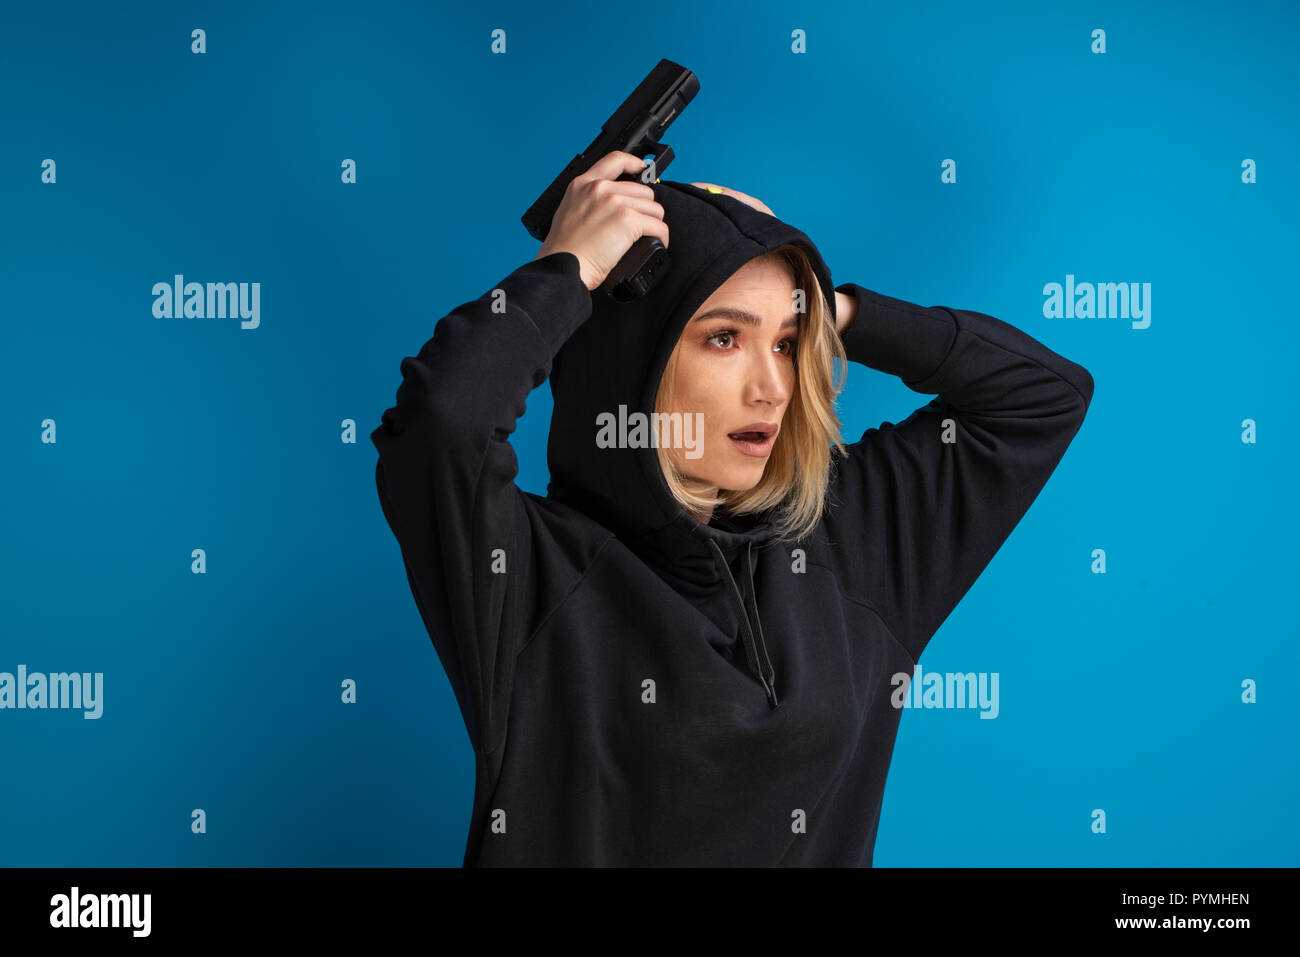 Portrait of hooded girl looking shocked while holding her hands with gun up on the head. Shot against blue background Stock Photo